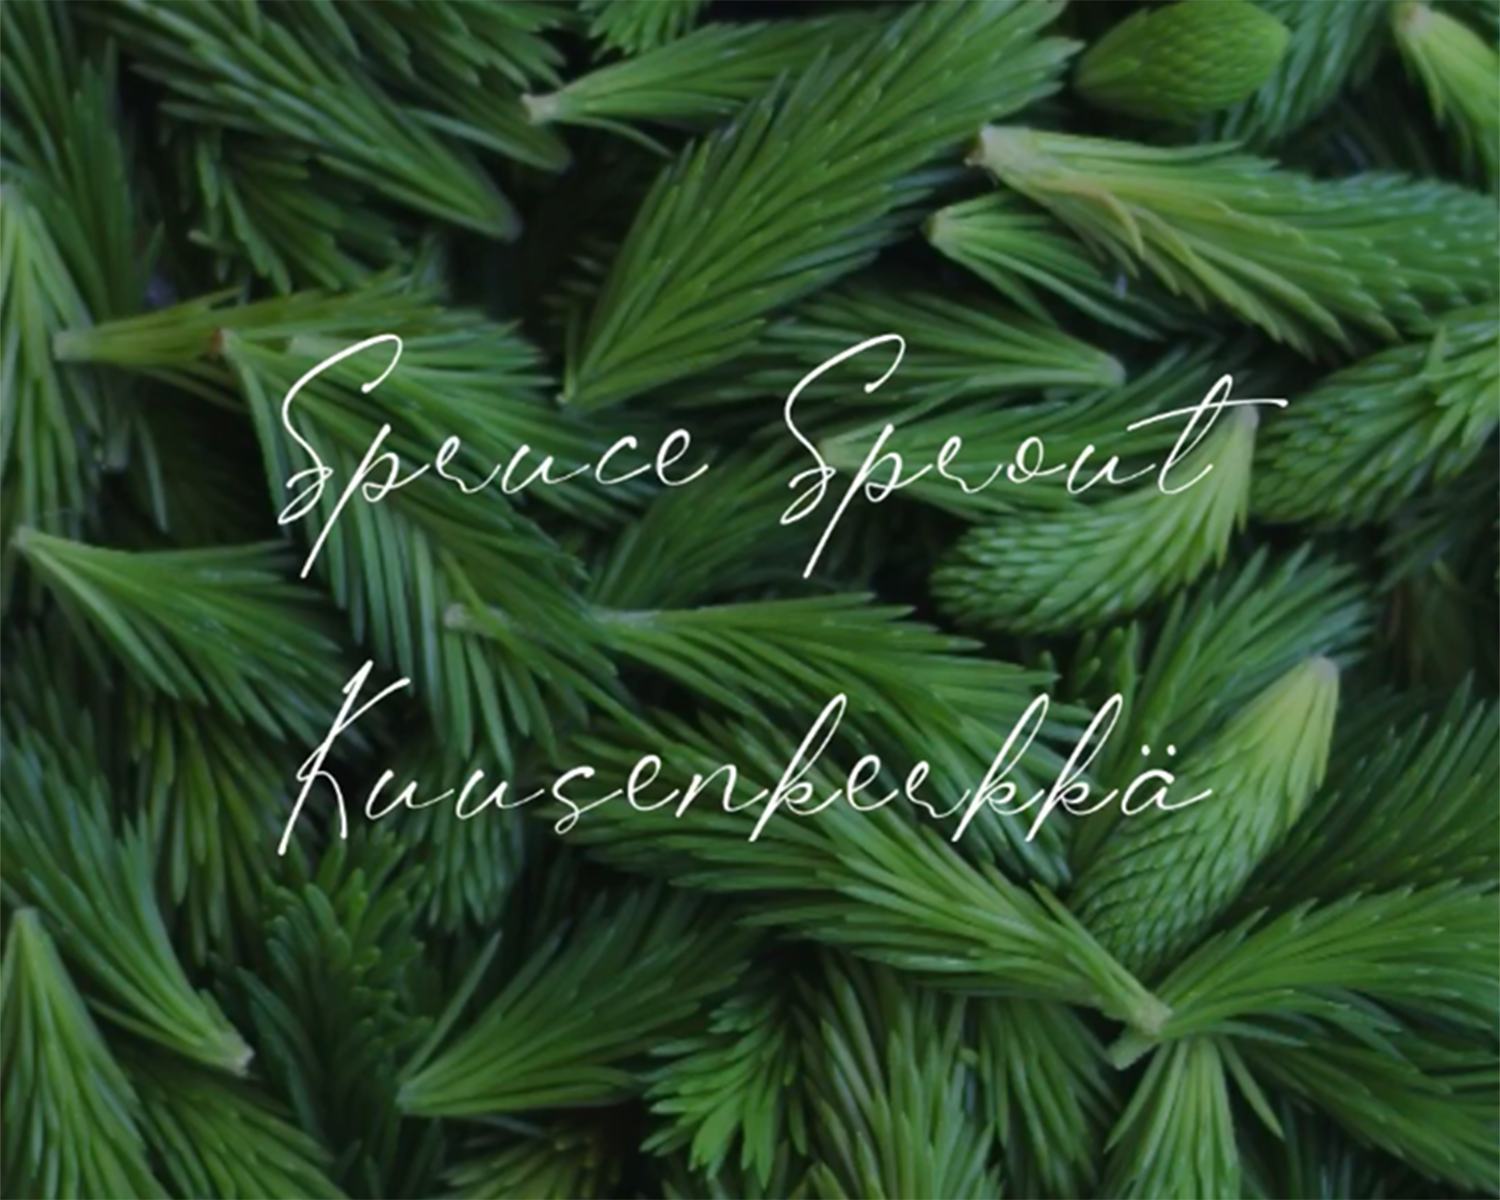 Spruce Sprouts - Green Gold from the Finnish Forests